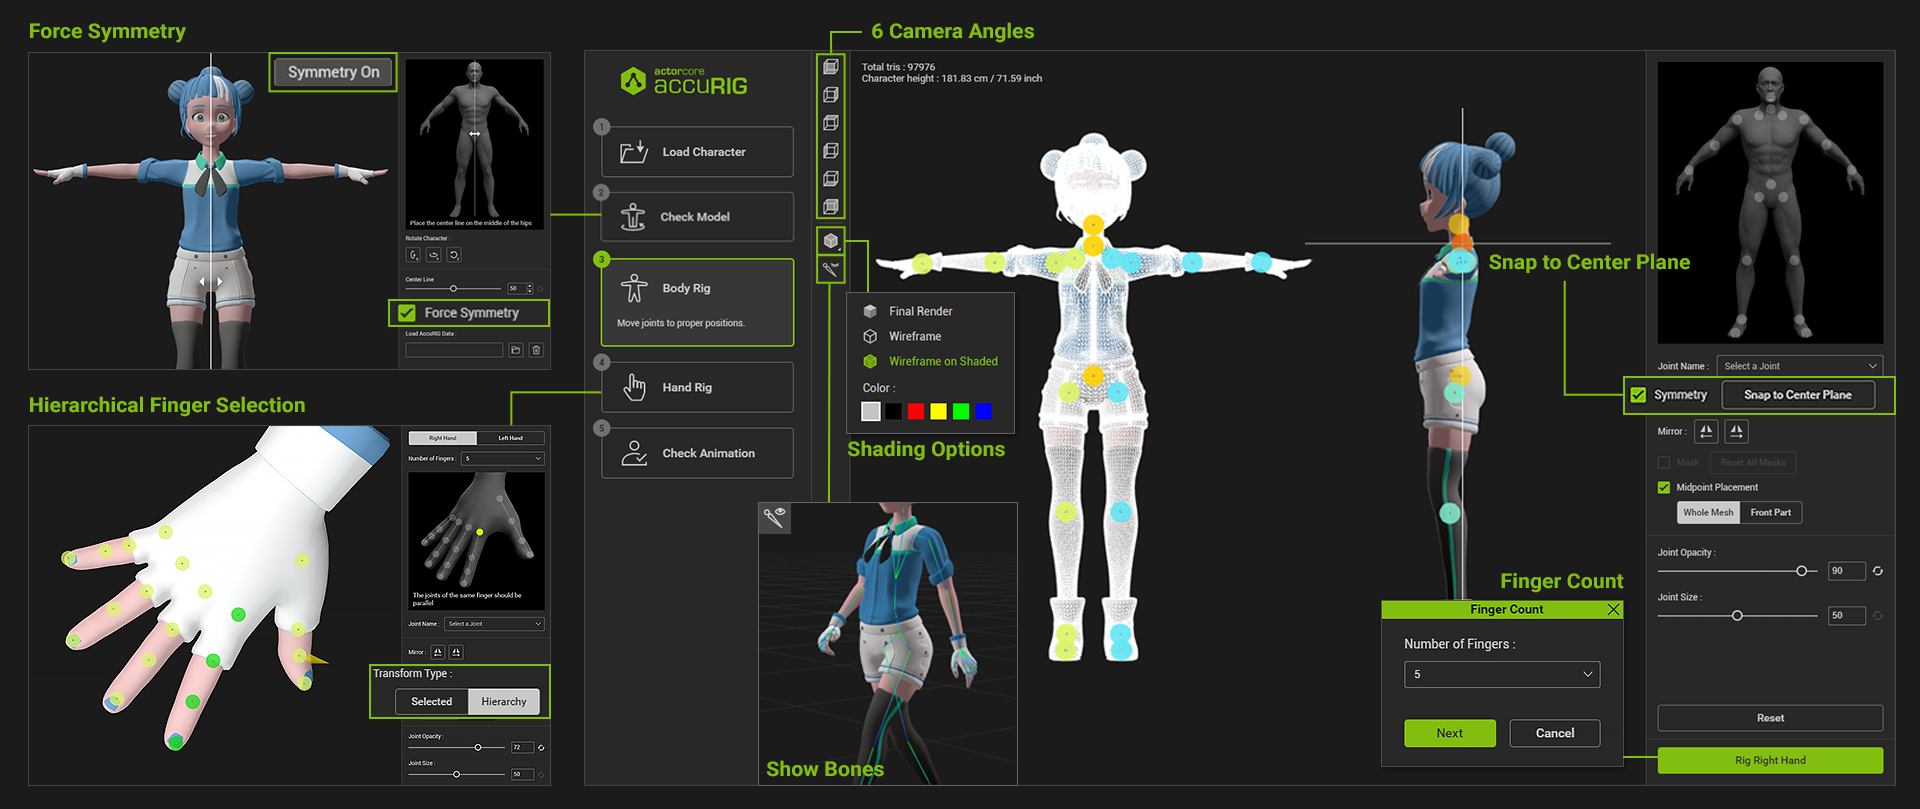 AccuRIG 1.1 improves it's Force Symmetry, Snap to Center Plane, Wireframe views and show bones